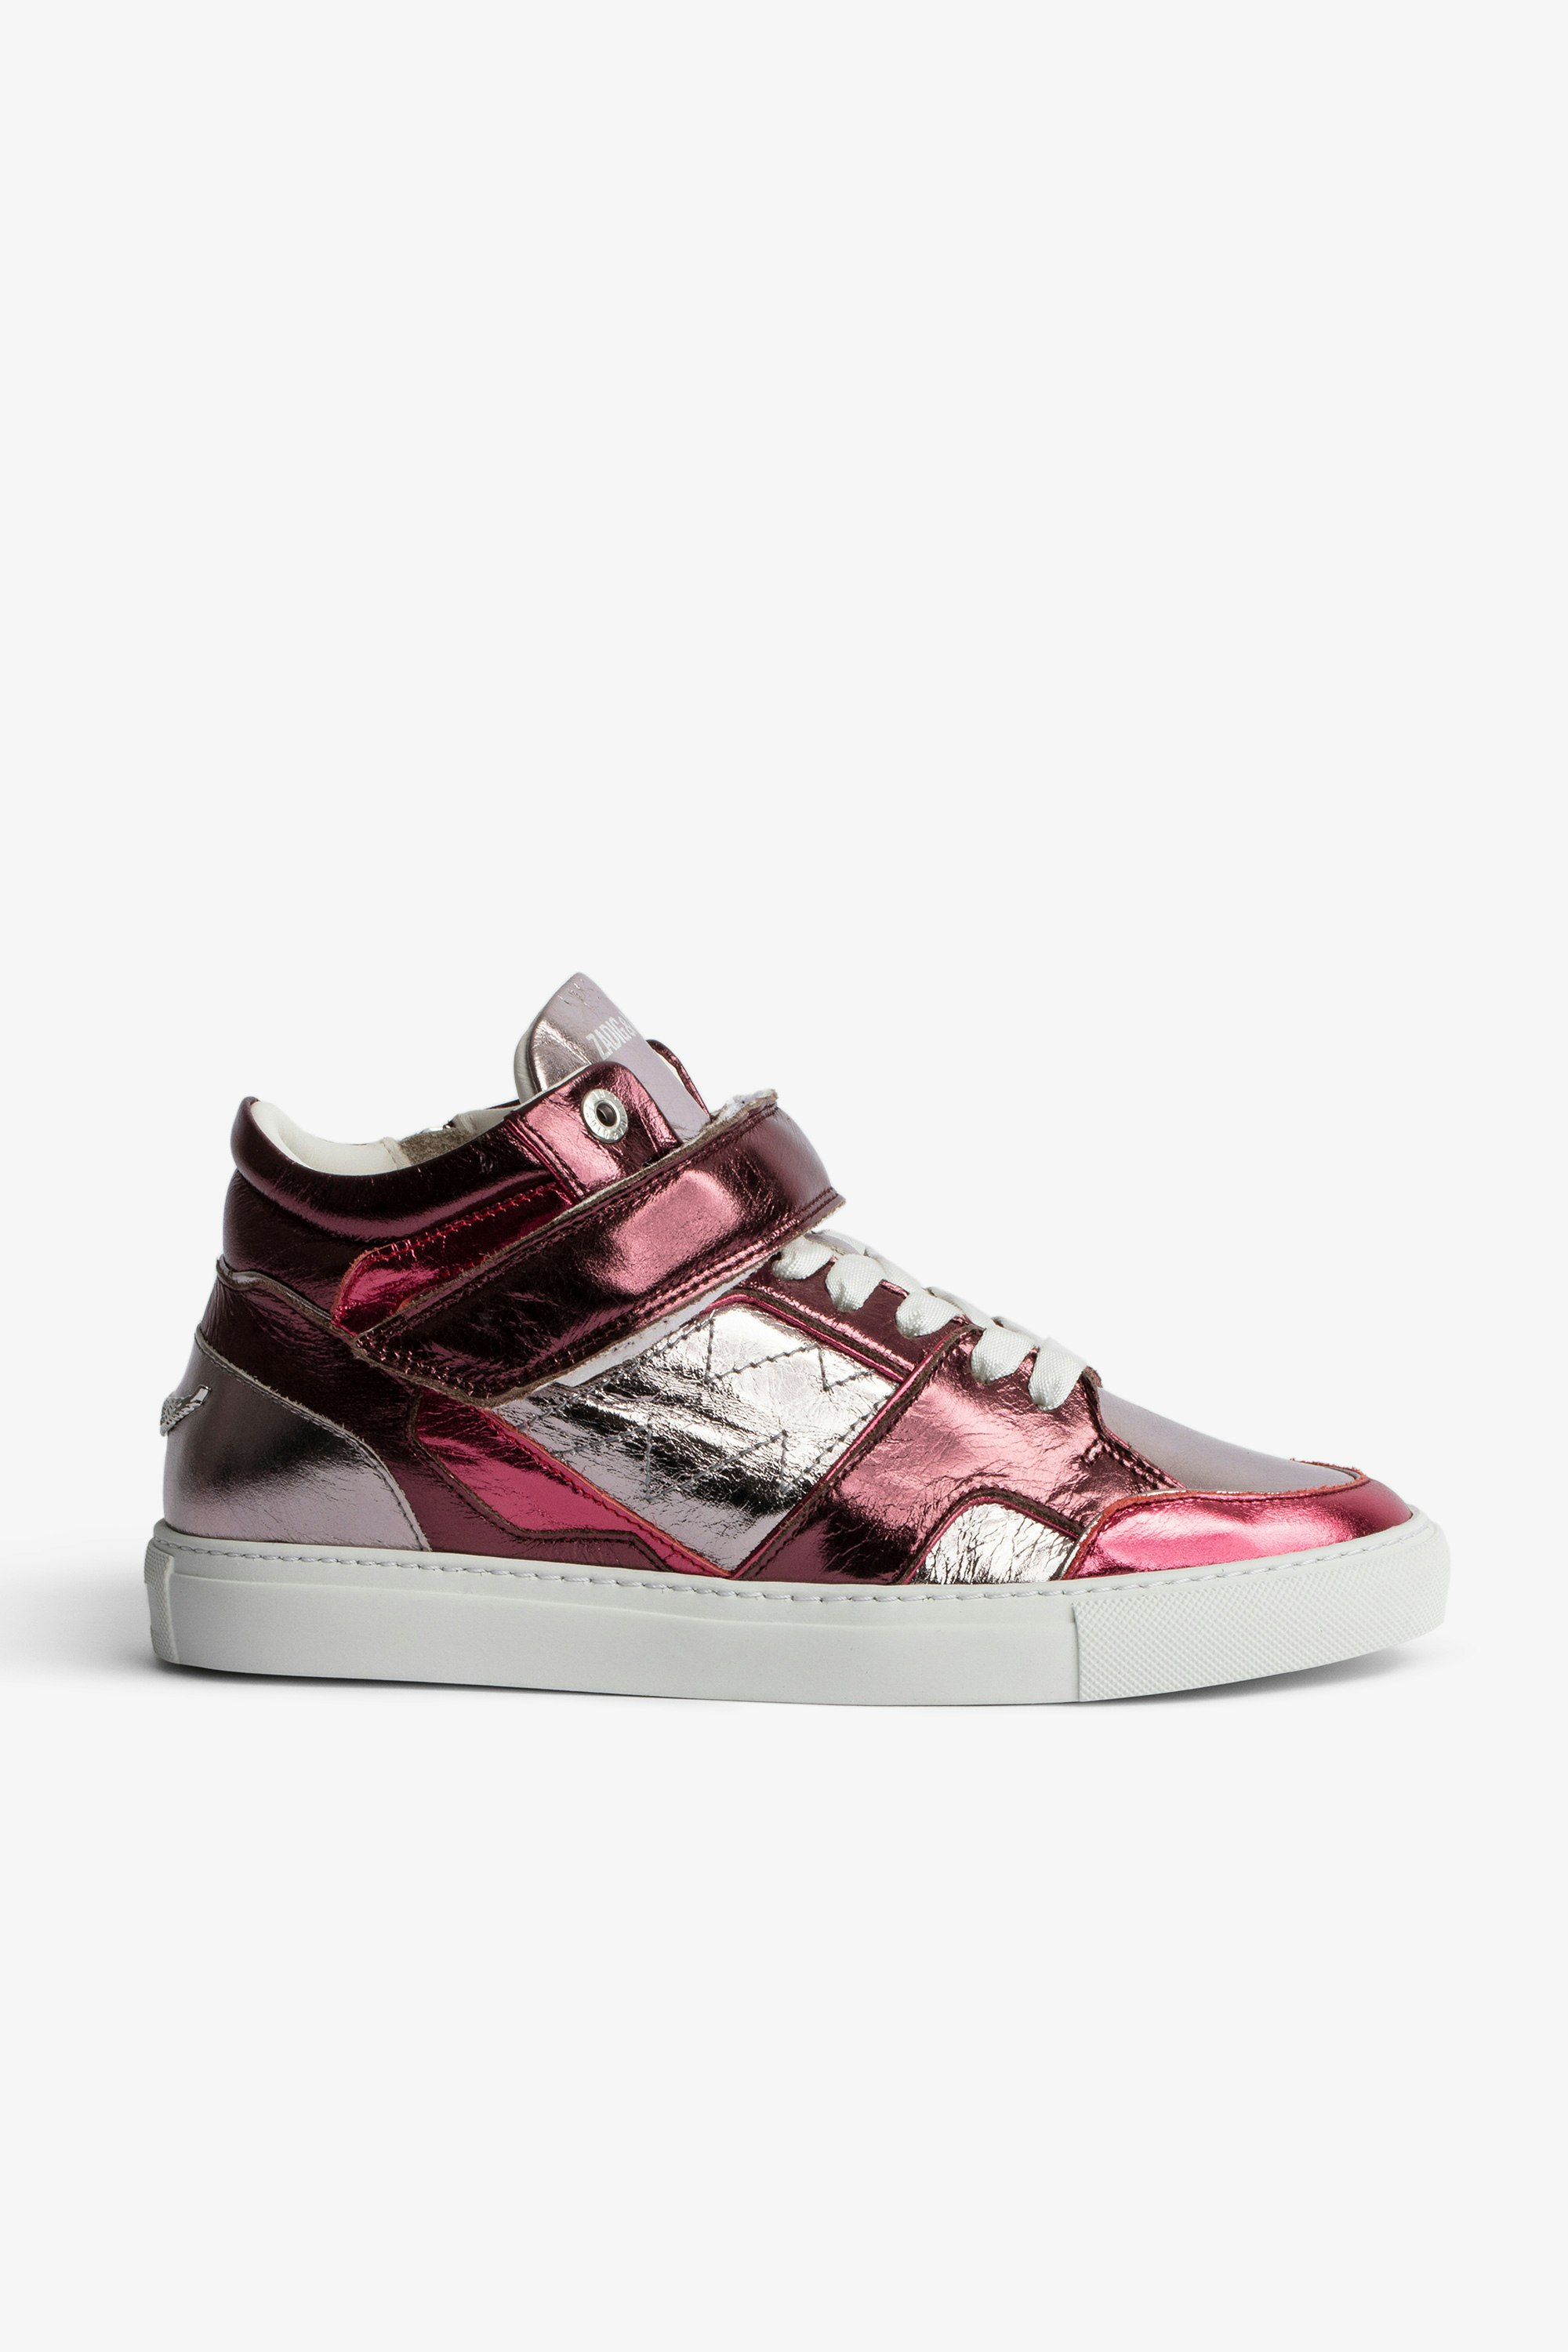 ZV1747 Mid-Top Sneakers Women’s mid-top sneakers in silver and red metallic leather